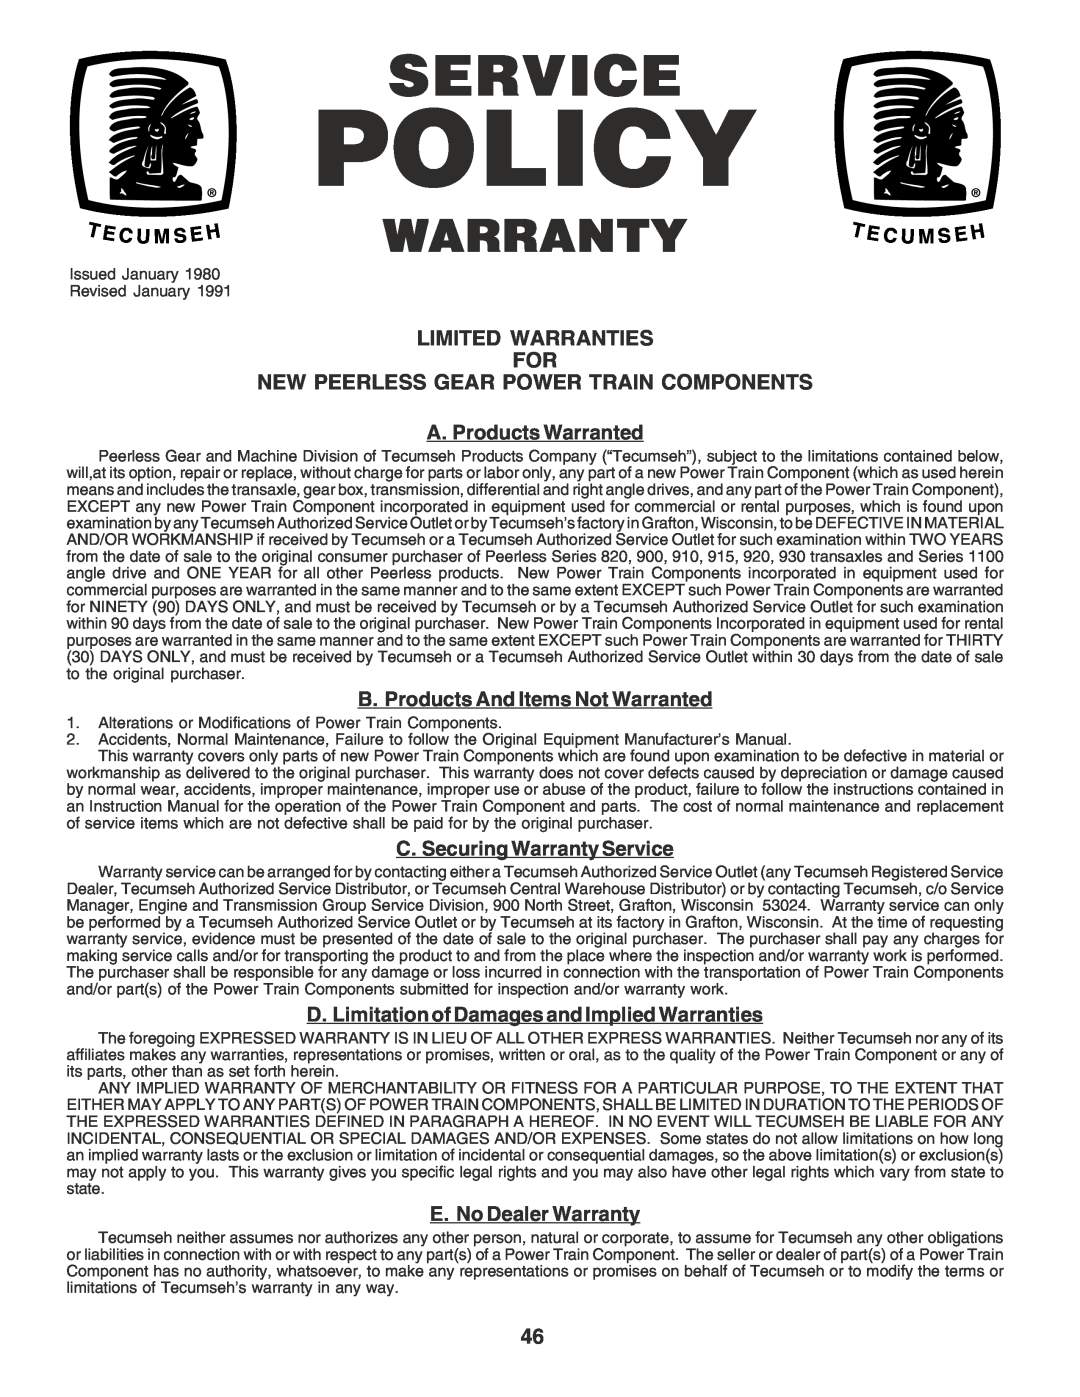 Poulan PR1842STD owner manual Limited Warranties For New Peerless Gear Power Train Components, Policy 